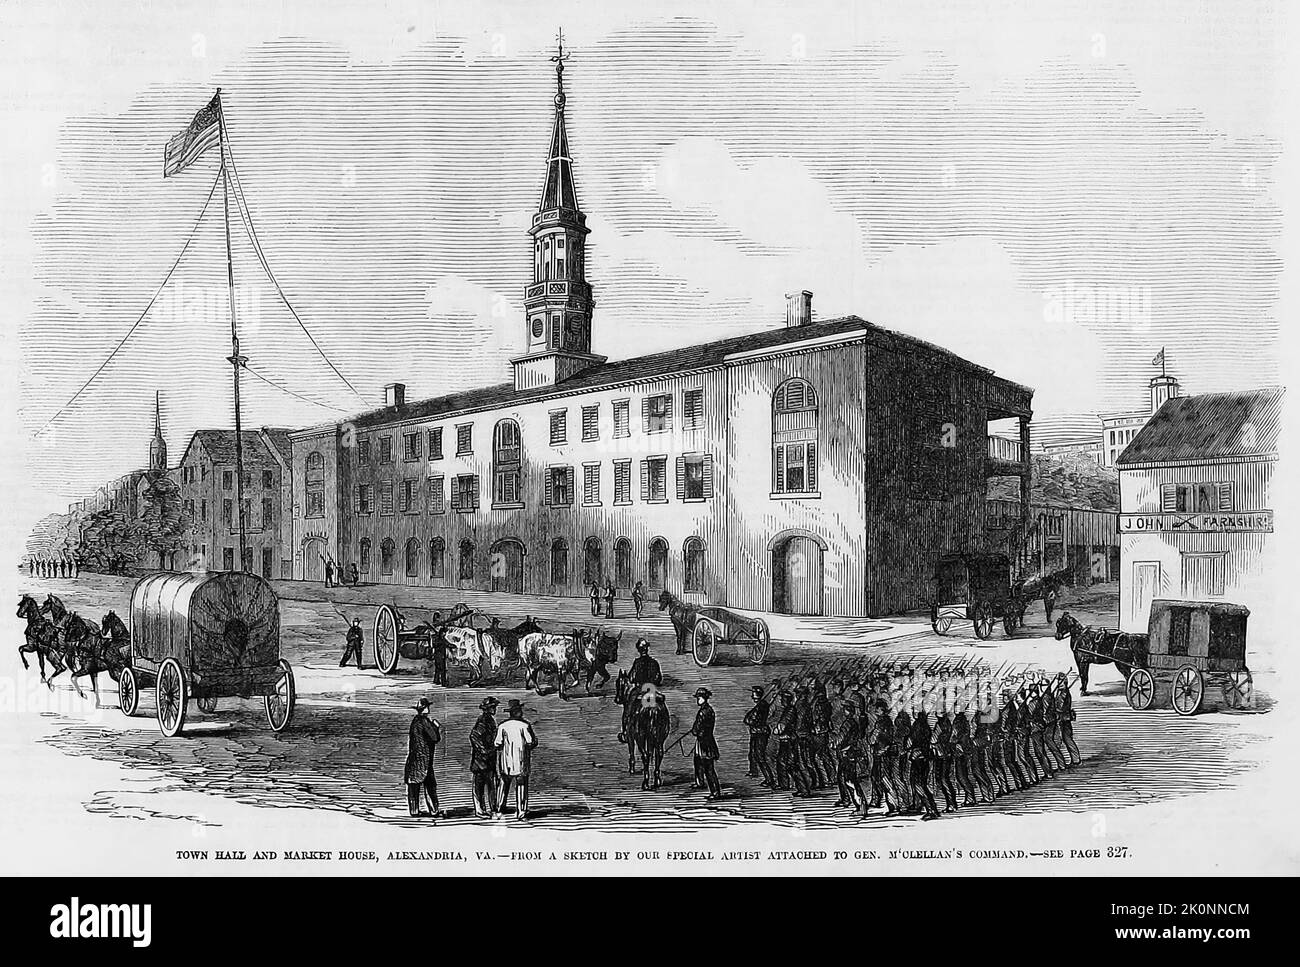 Town Hall and Market House, Alexandria, Virginia. October 1861. 19th century American Civil War illustration from Frank Leslie's Illustrated Newspaper Stock Photo